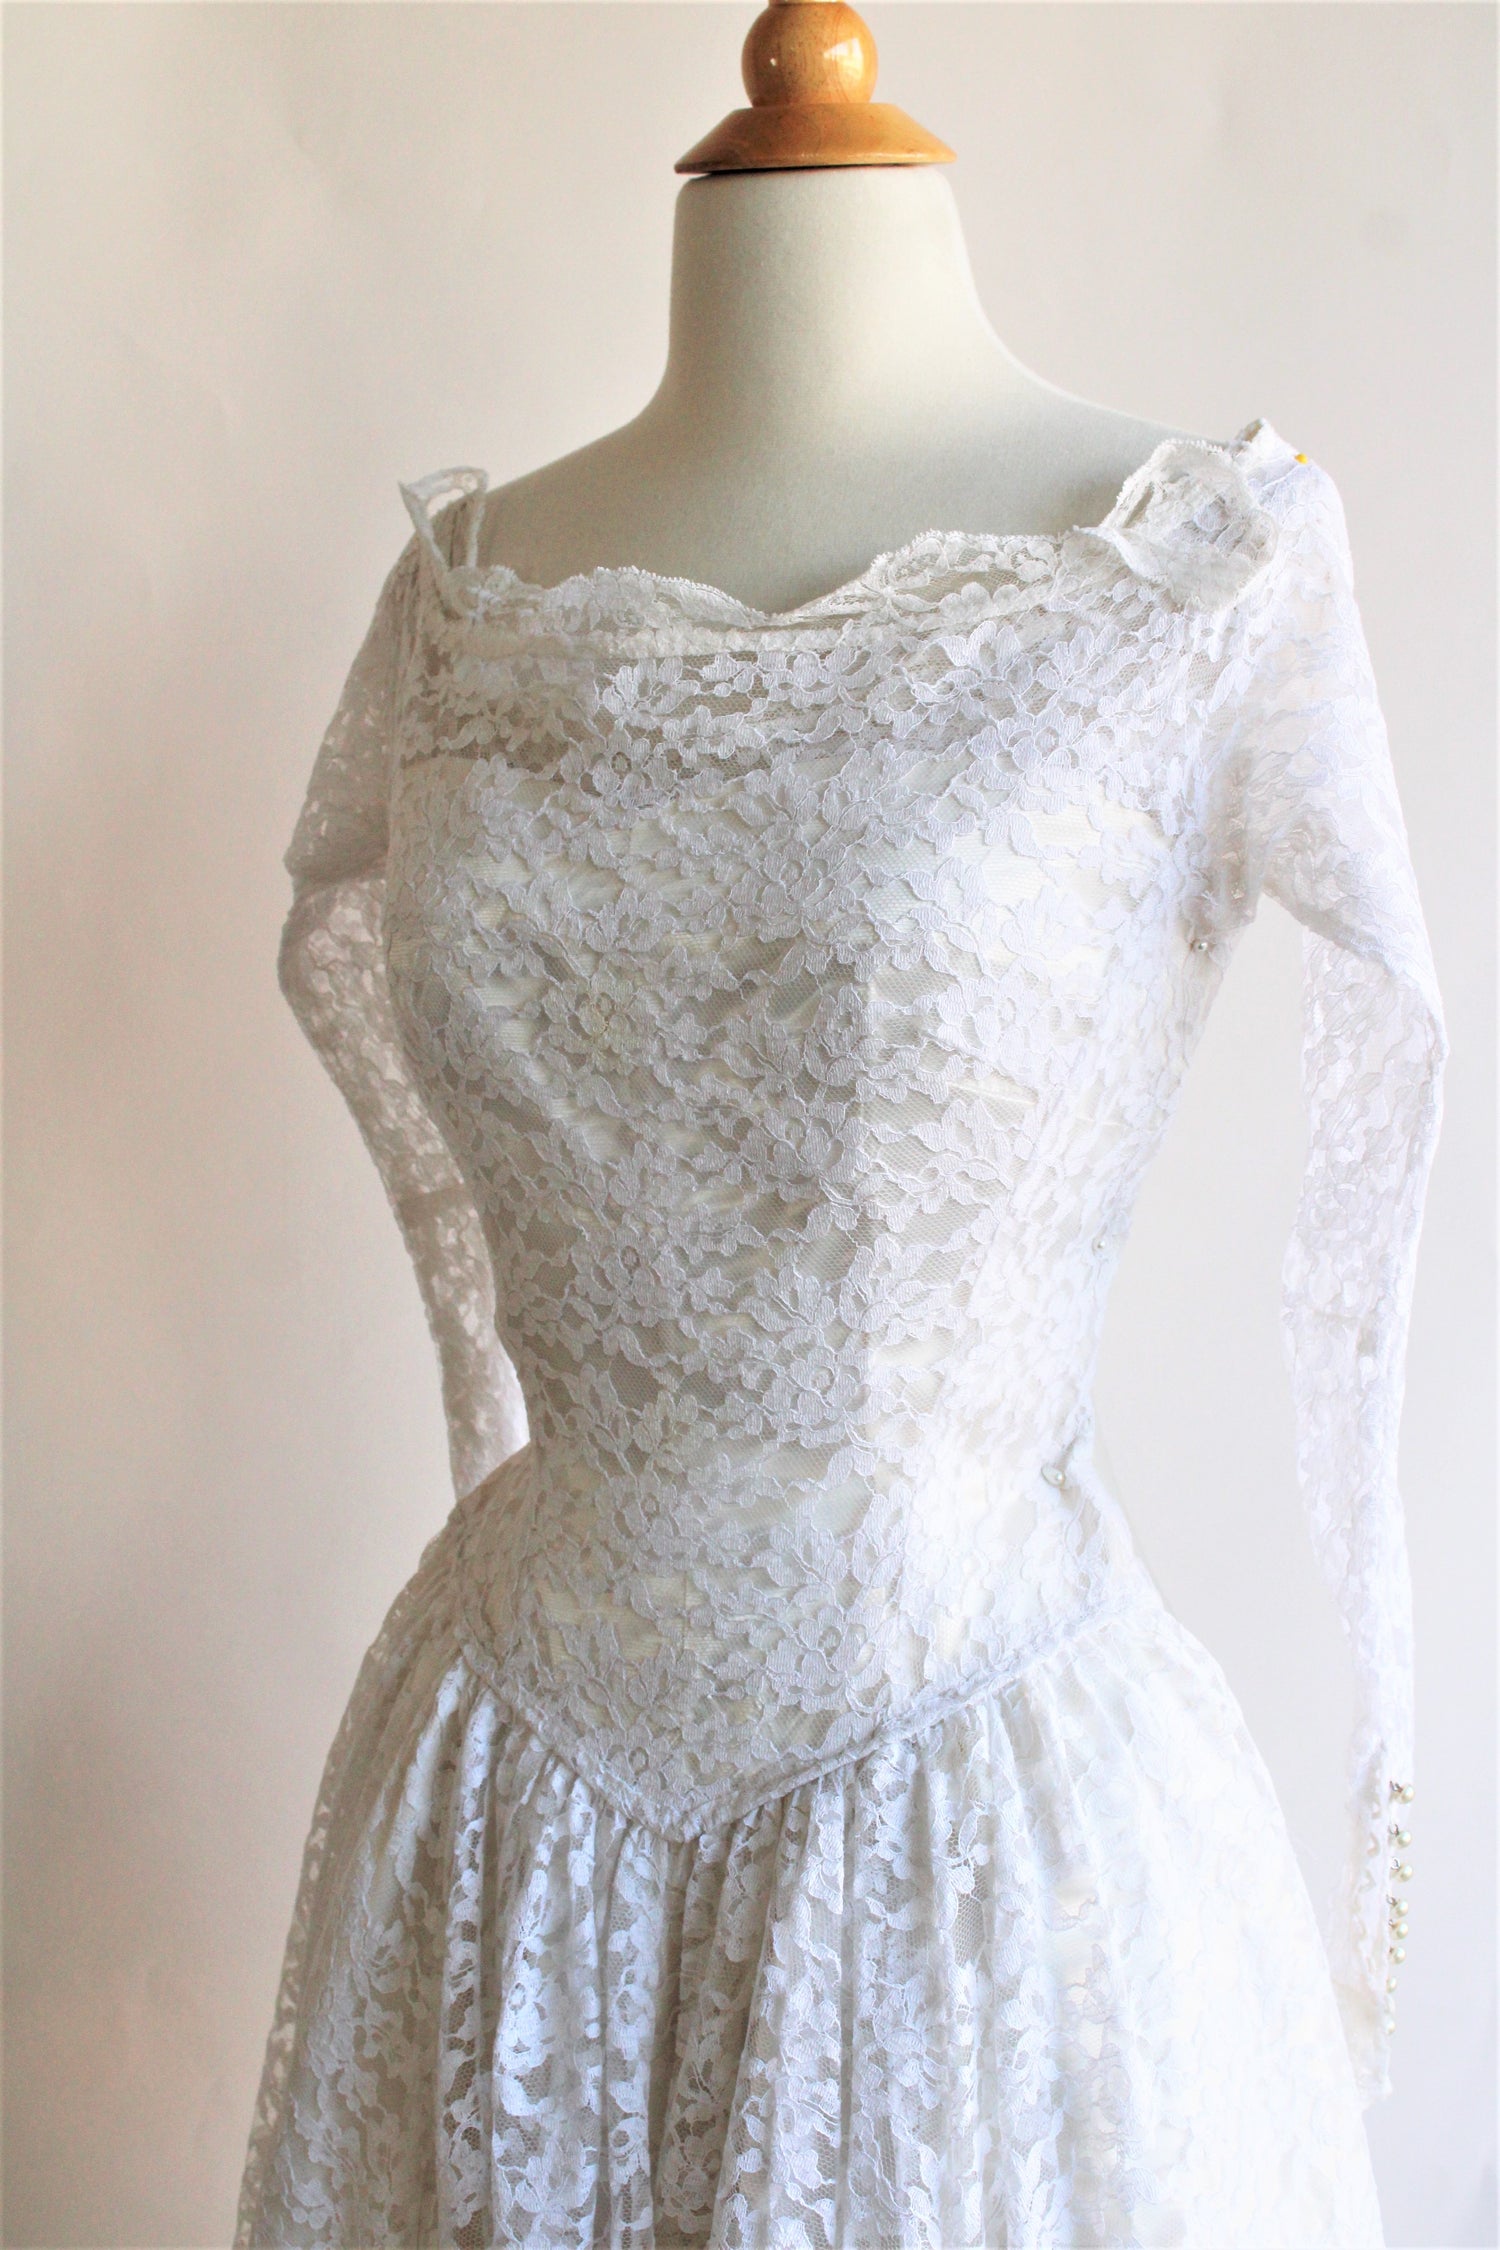 1950s White Lace Fit and Flare New Look Dress With Full Circle Skirt